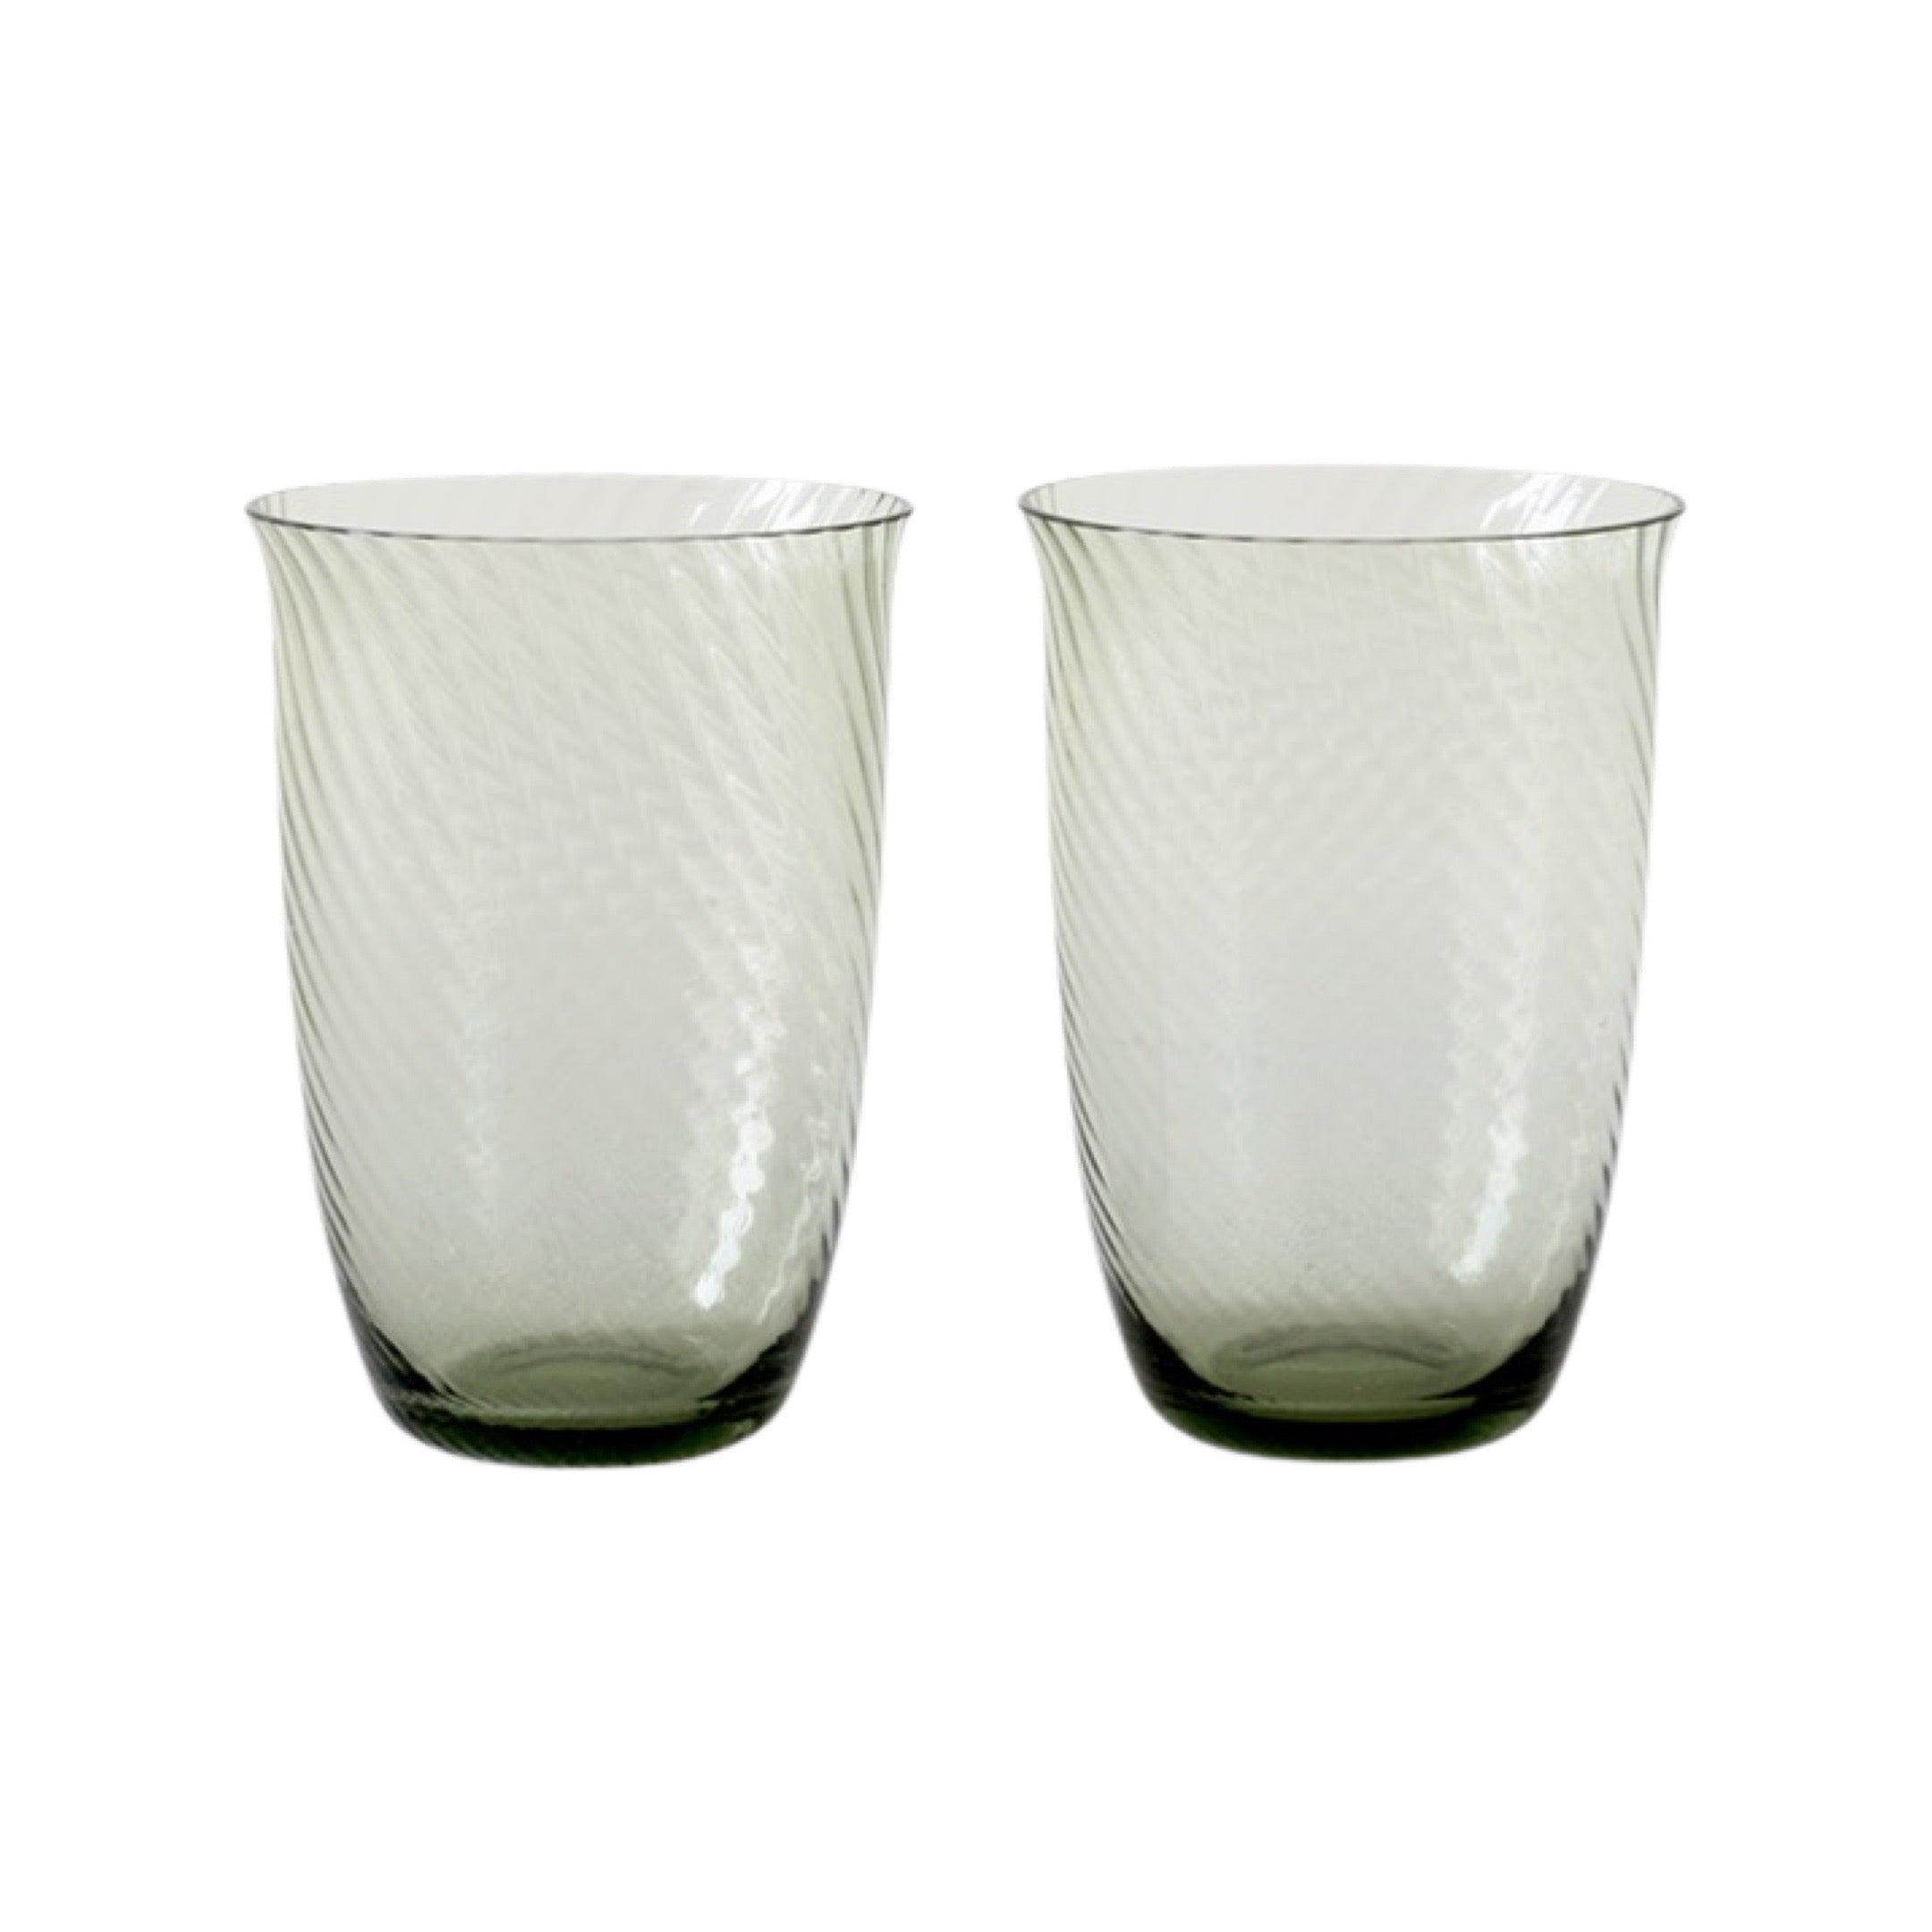 &Tradition Collect SC61 Drinking Glass - 400ml (Set of 2)